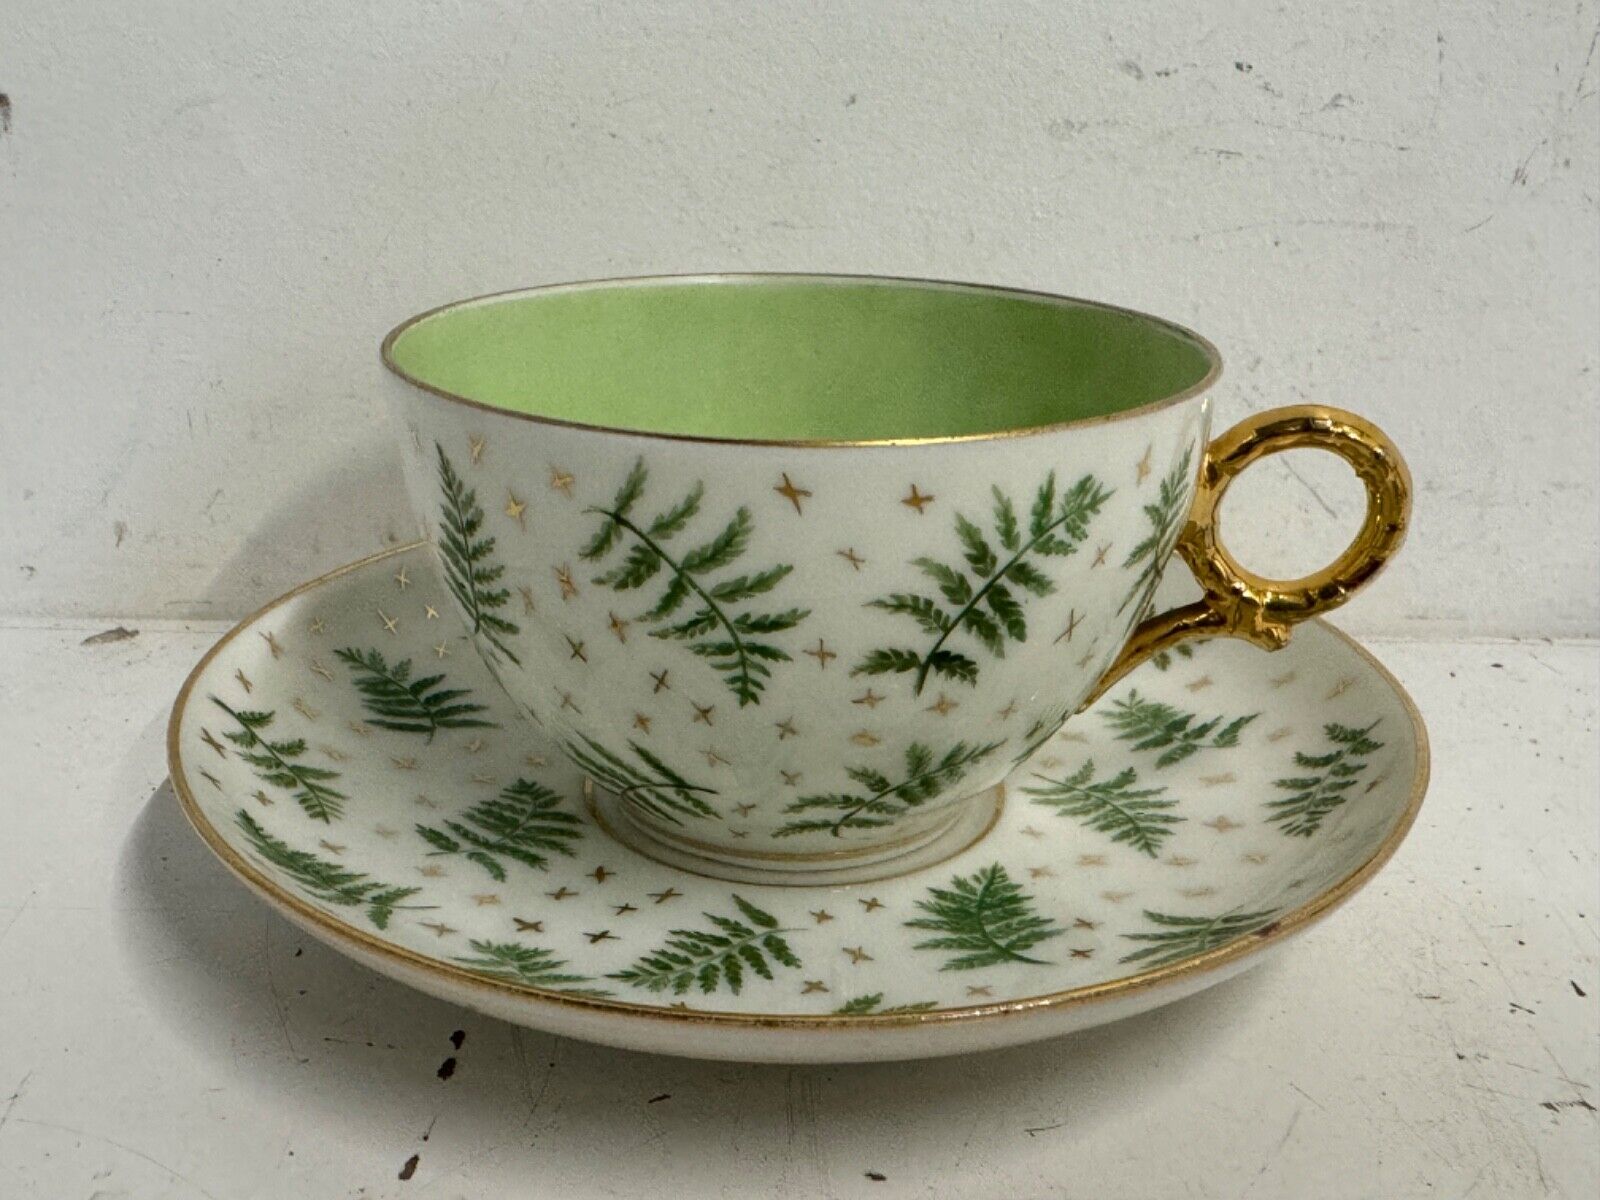 Antique Heinrich and Co Porcelain Cup and Saucer with Green Fern Decorations